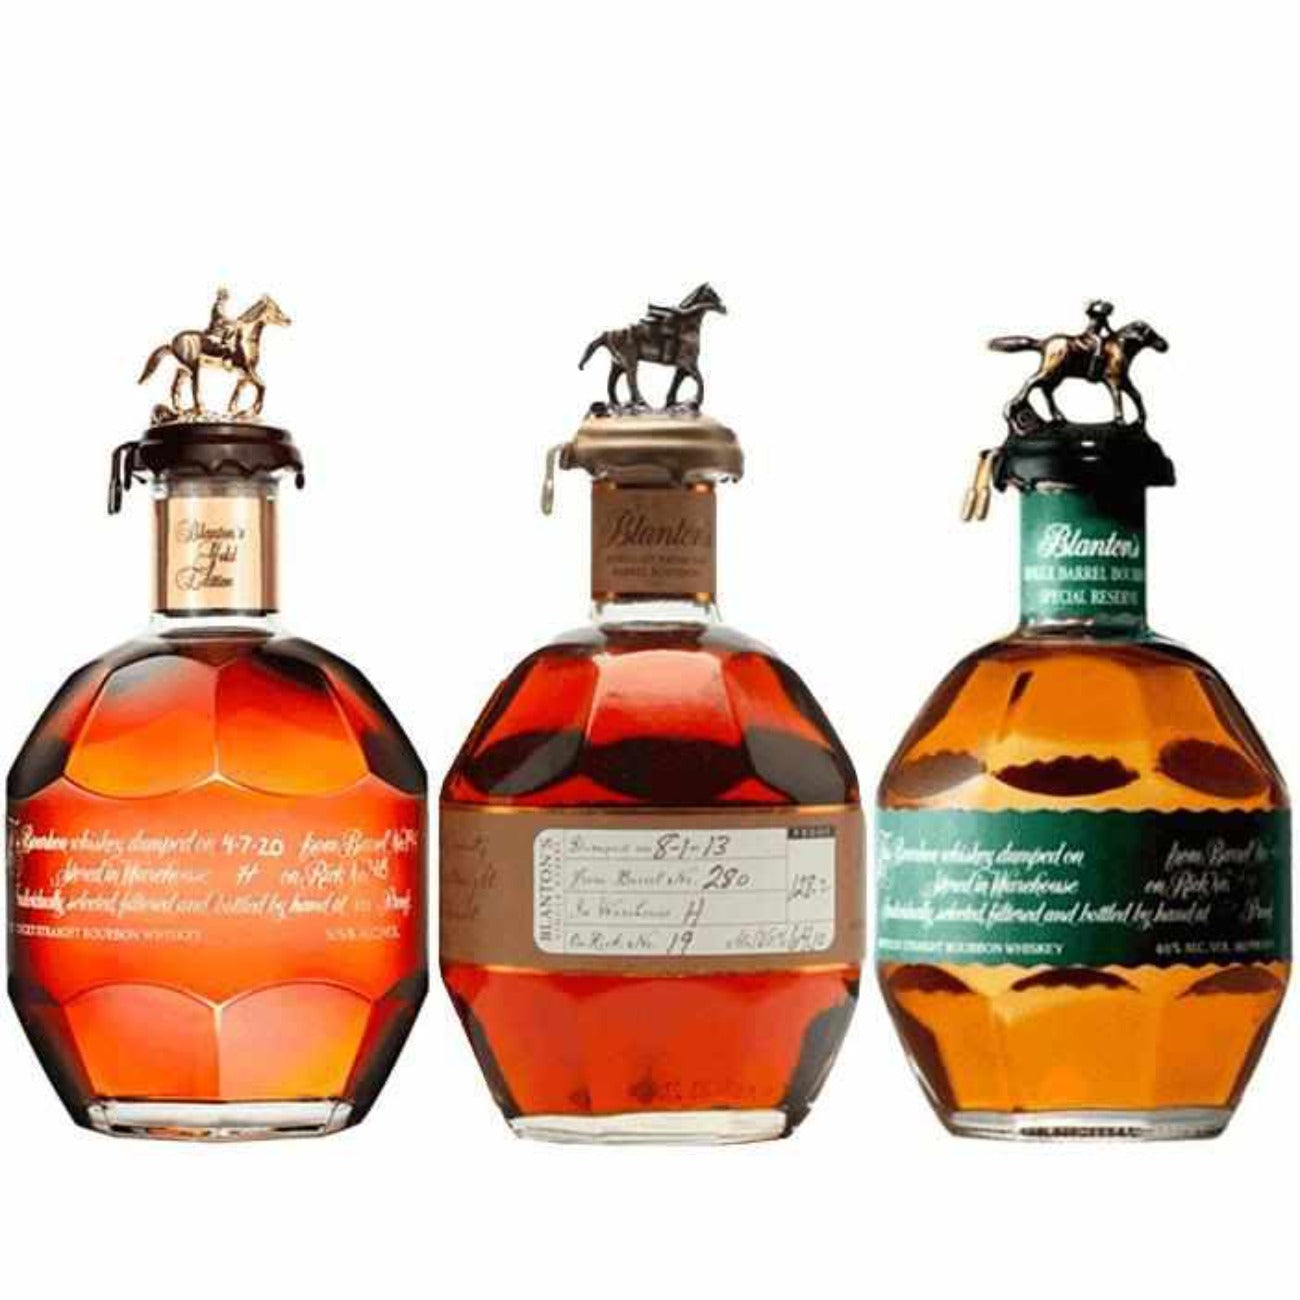 BLANTON'S BOURBON SPECIAL PRICE!, ONLY 12 AVAILABLE